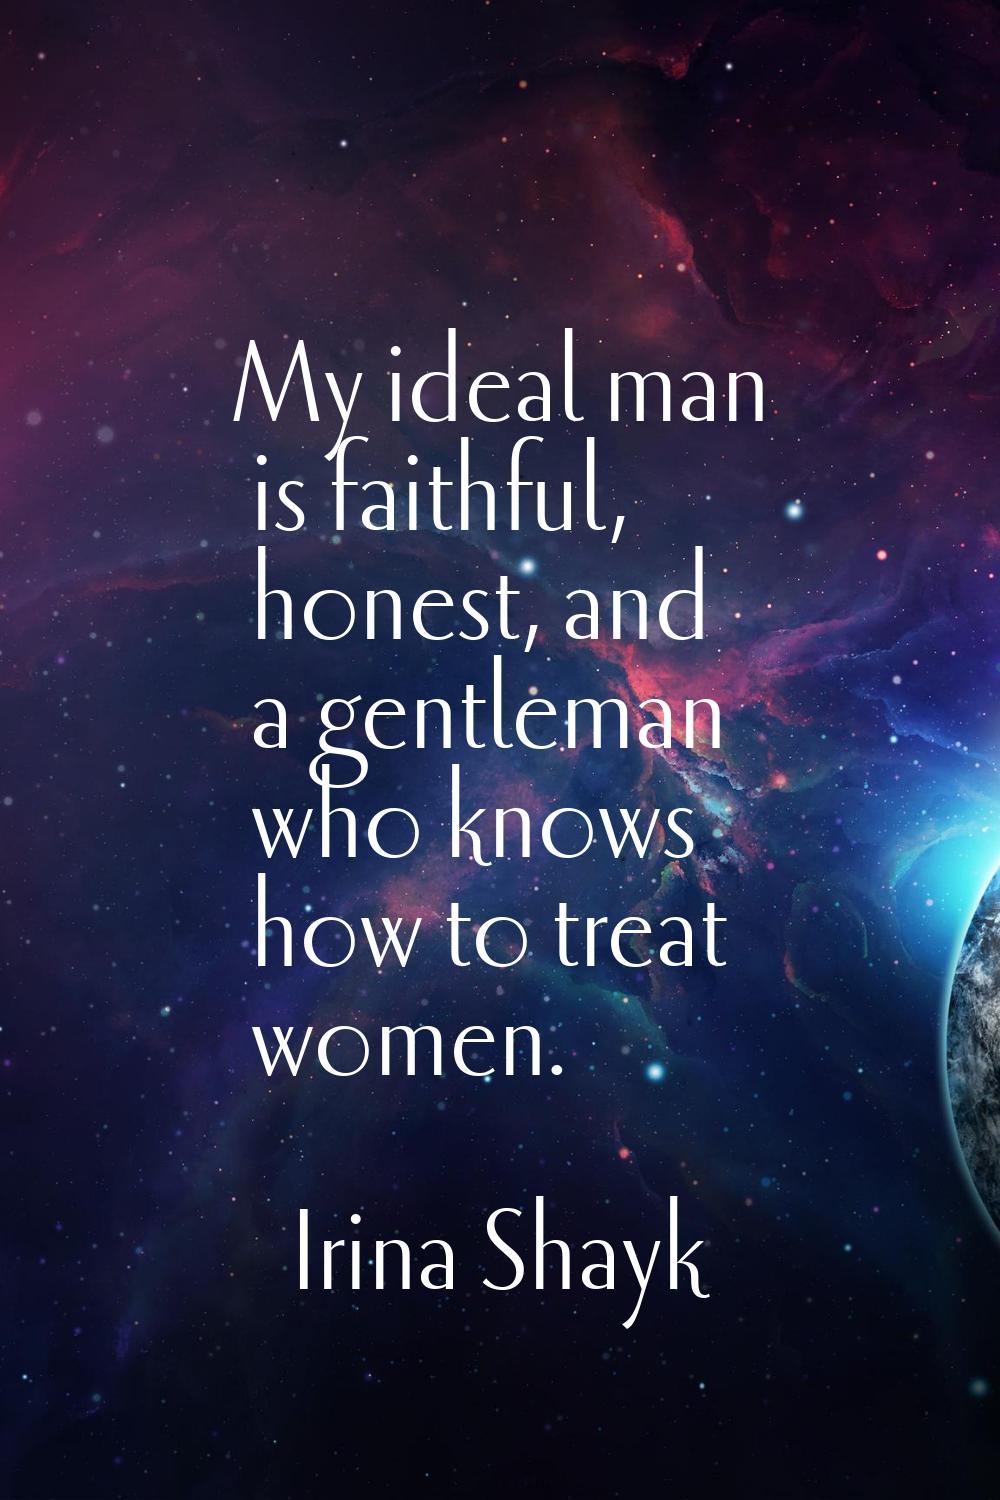 My ideal man is faithful, honest, and a gentleman who knows how to treat women.